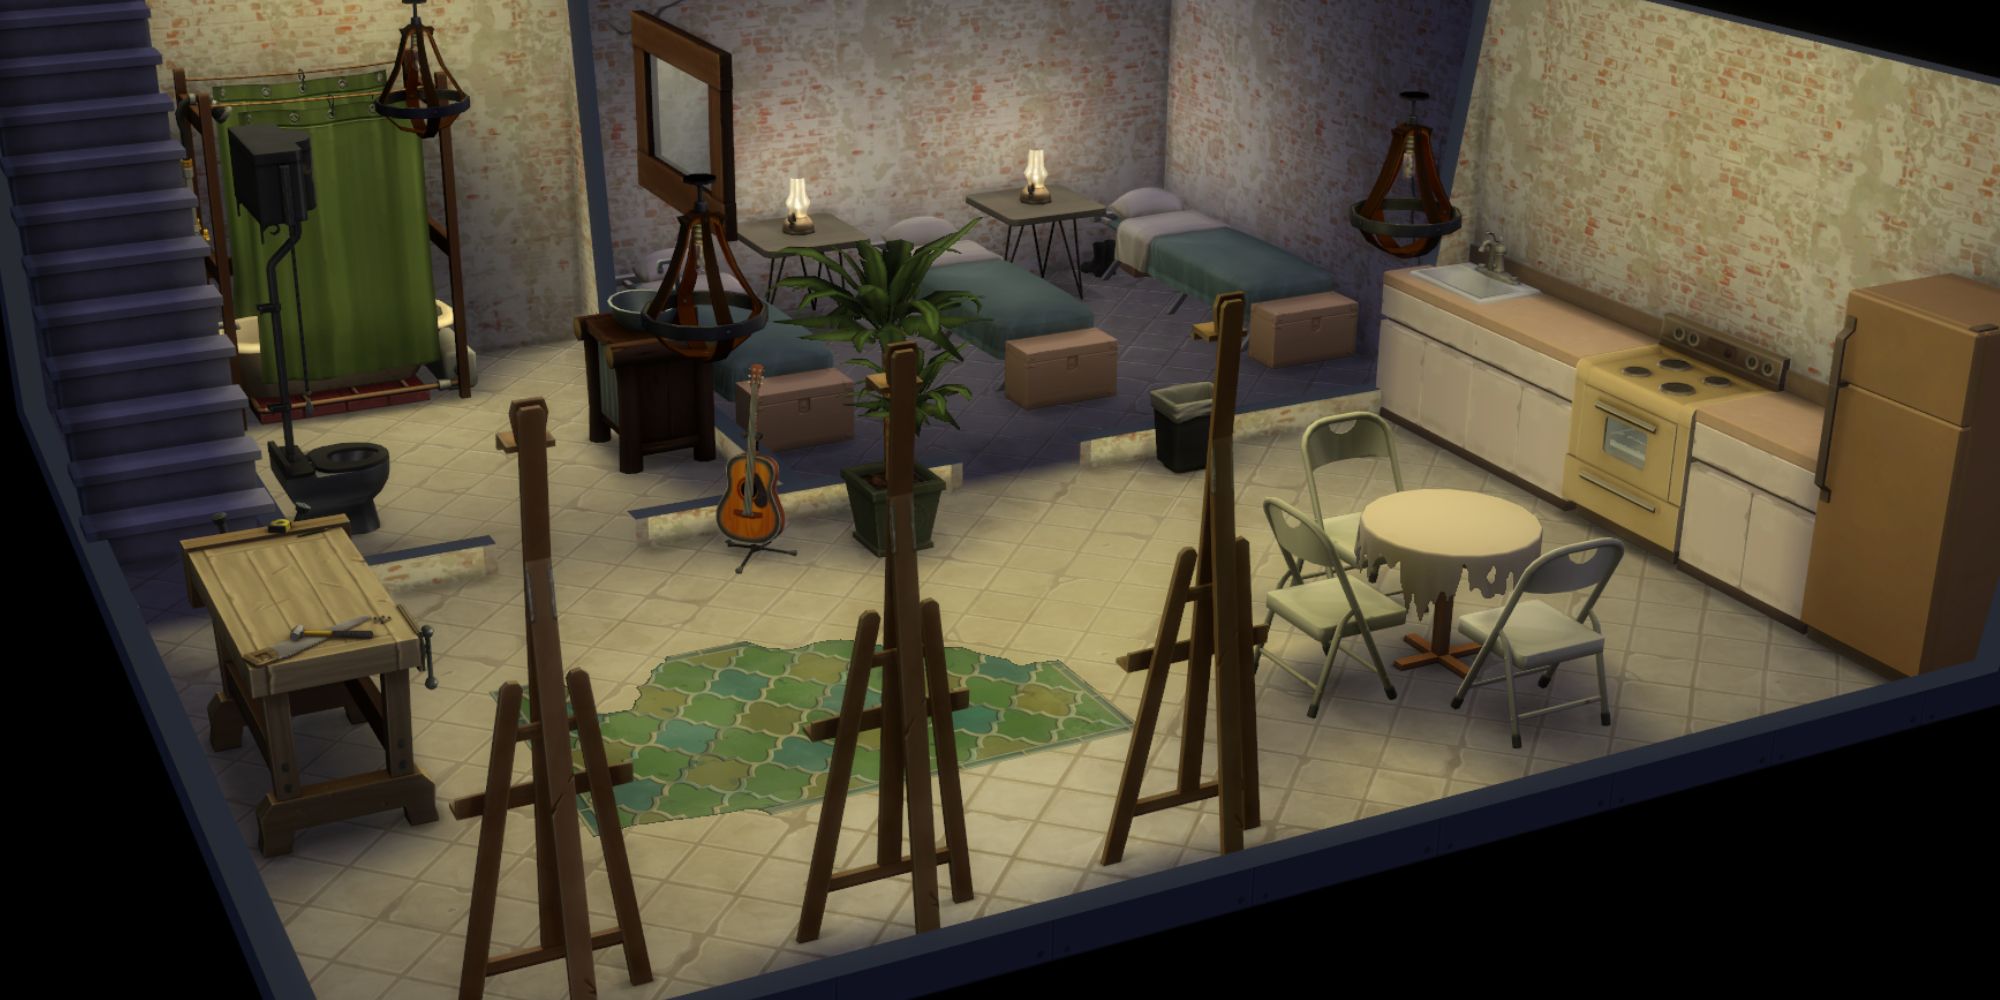 Sims 4 not at all suspicious basement